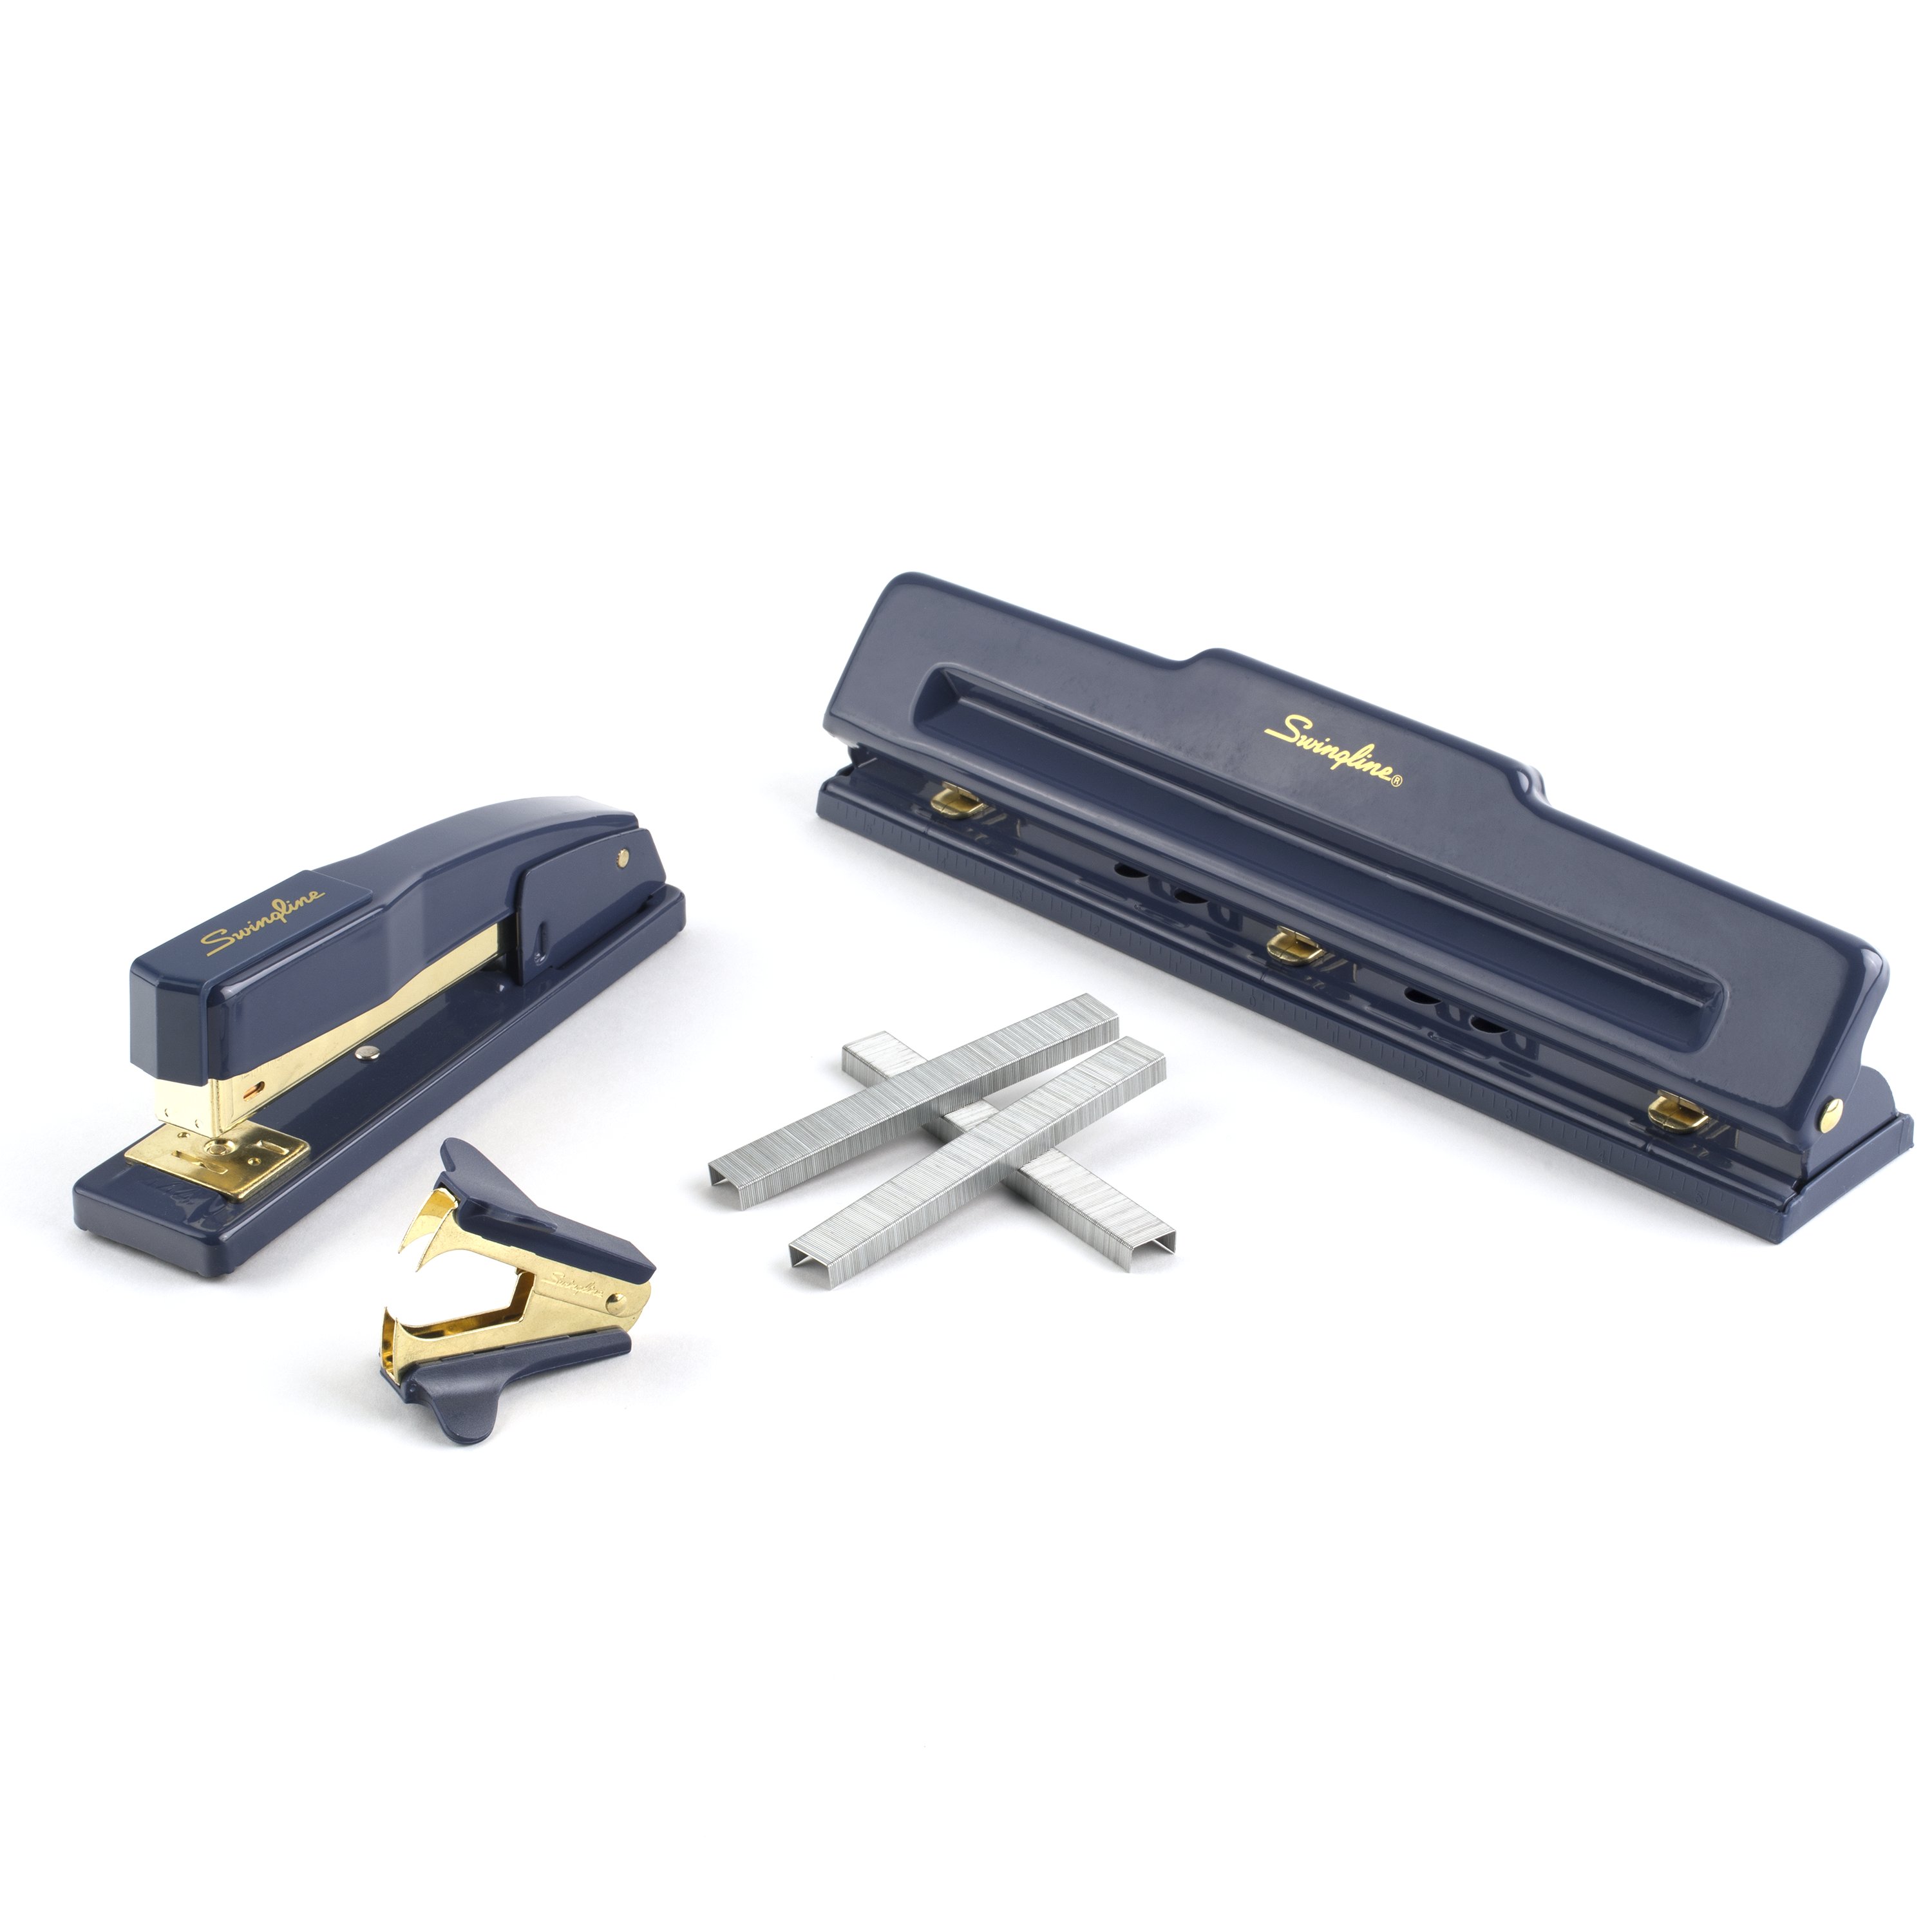 Swingline 444 Stapler Punch Kit, Navy and Gold (S7044405-WMT) - image 1 of 9